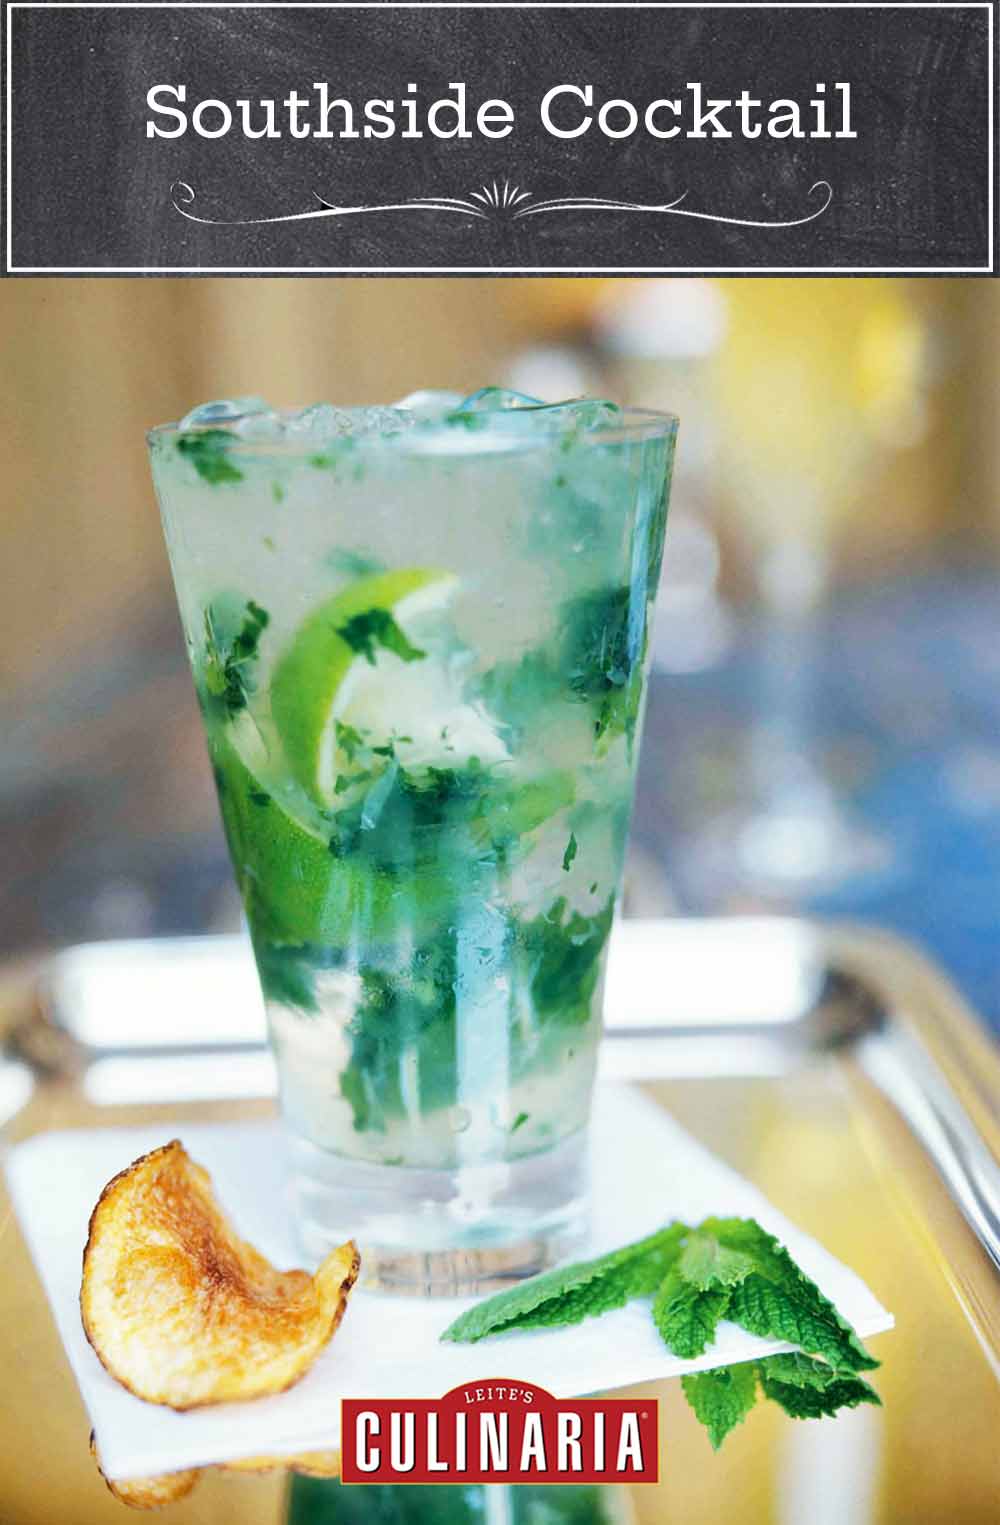 A southside cocktail on a napkin on a silver tray with a potato chip and sprig of mint beside it.